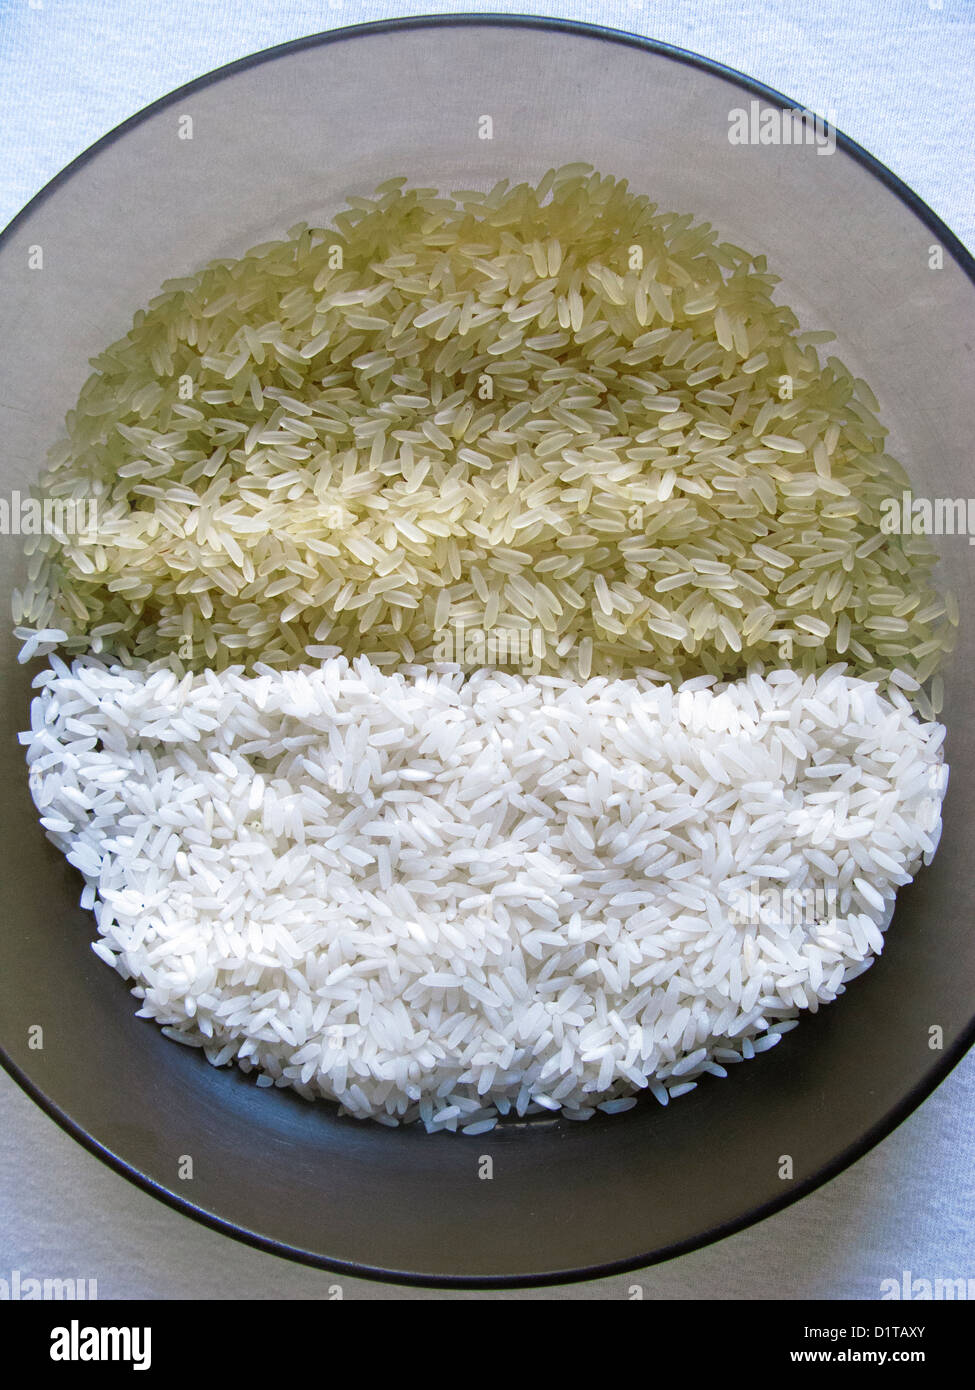 Brown and White Rice in a Bowl Stock Photo